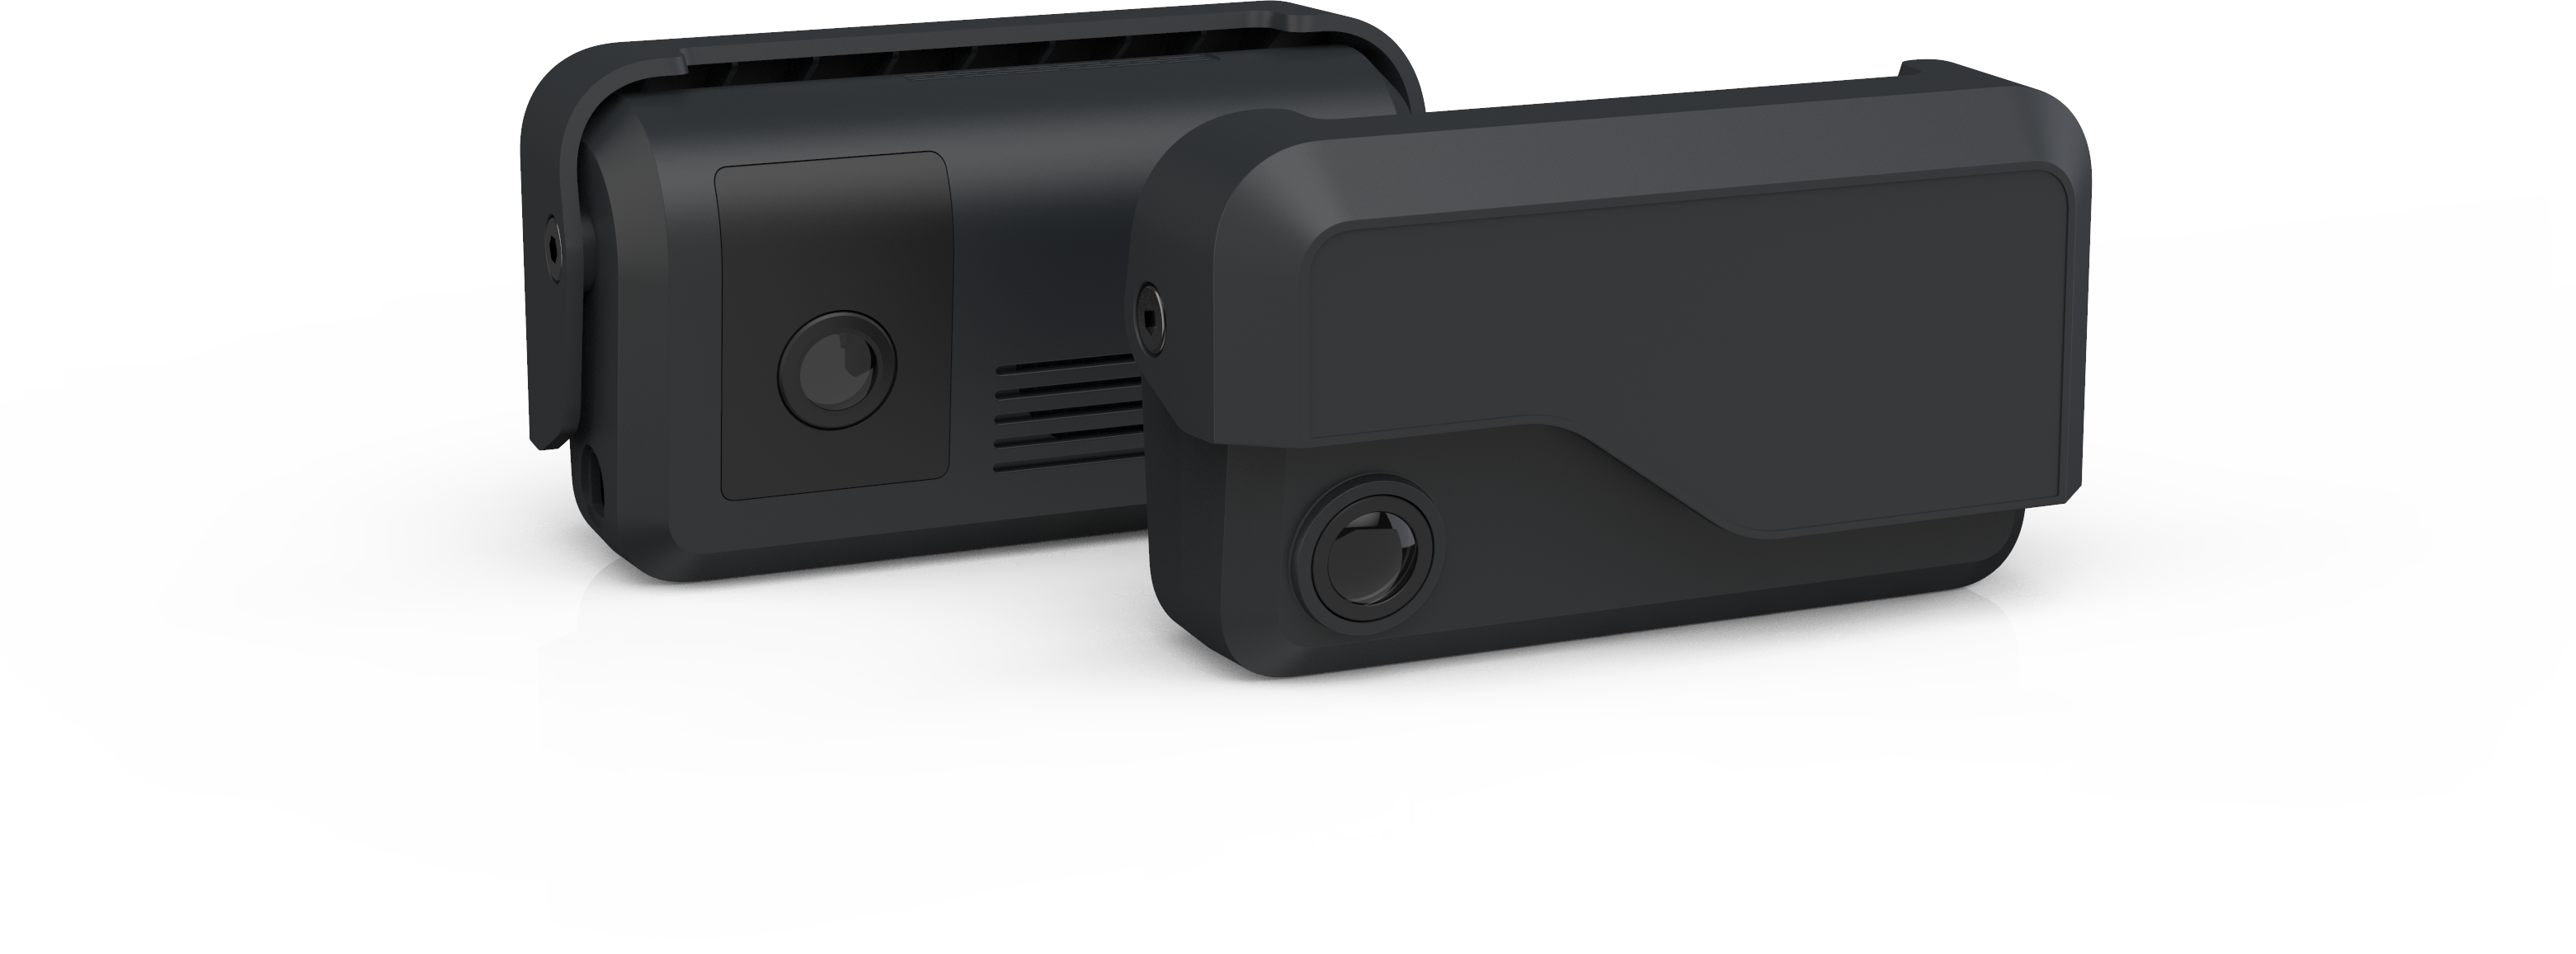 Save 32% on a tiny dash cam that can be mounted anywhere, for your  protection